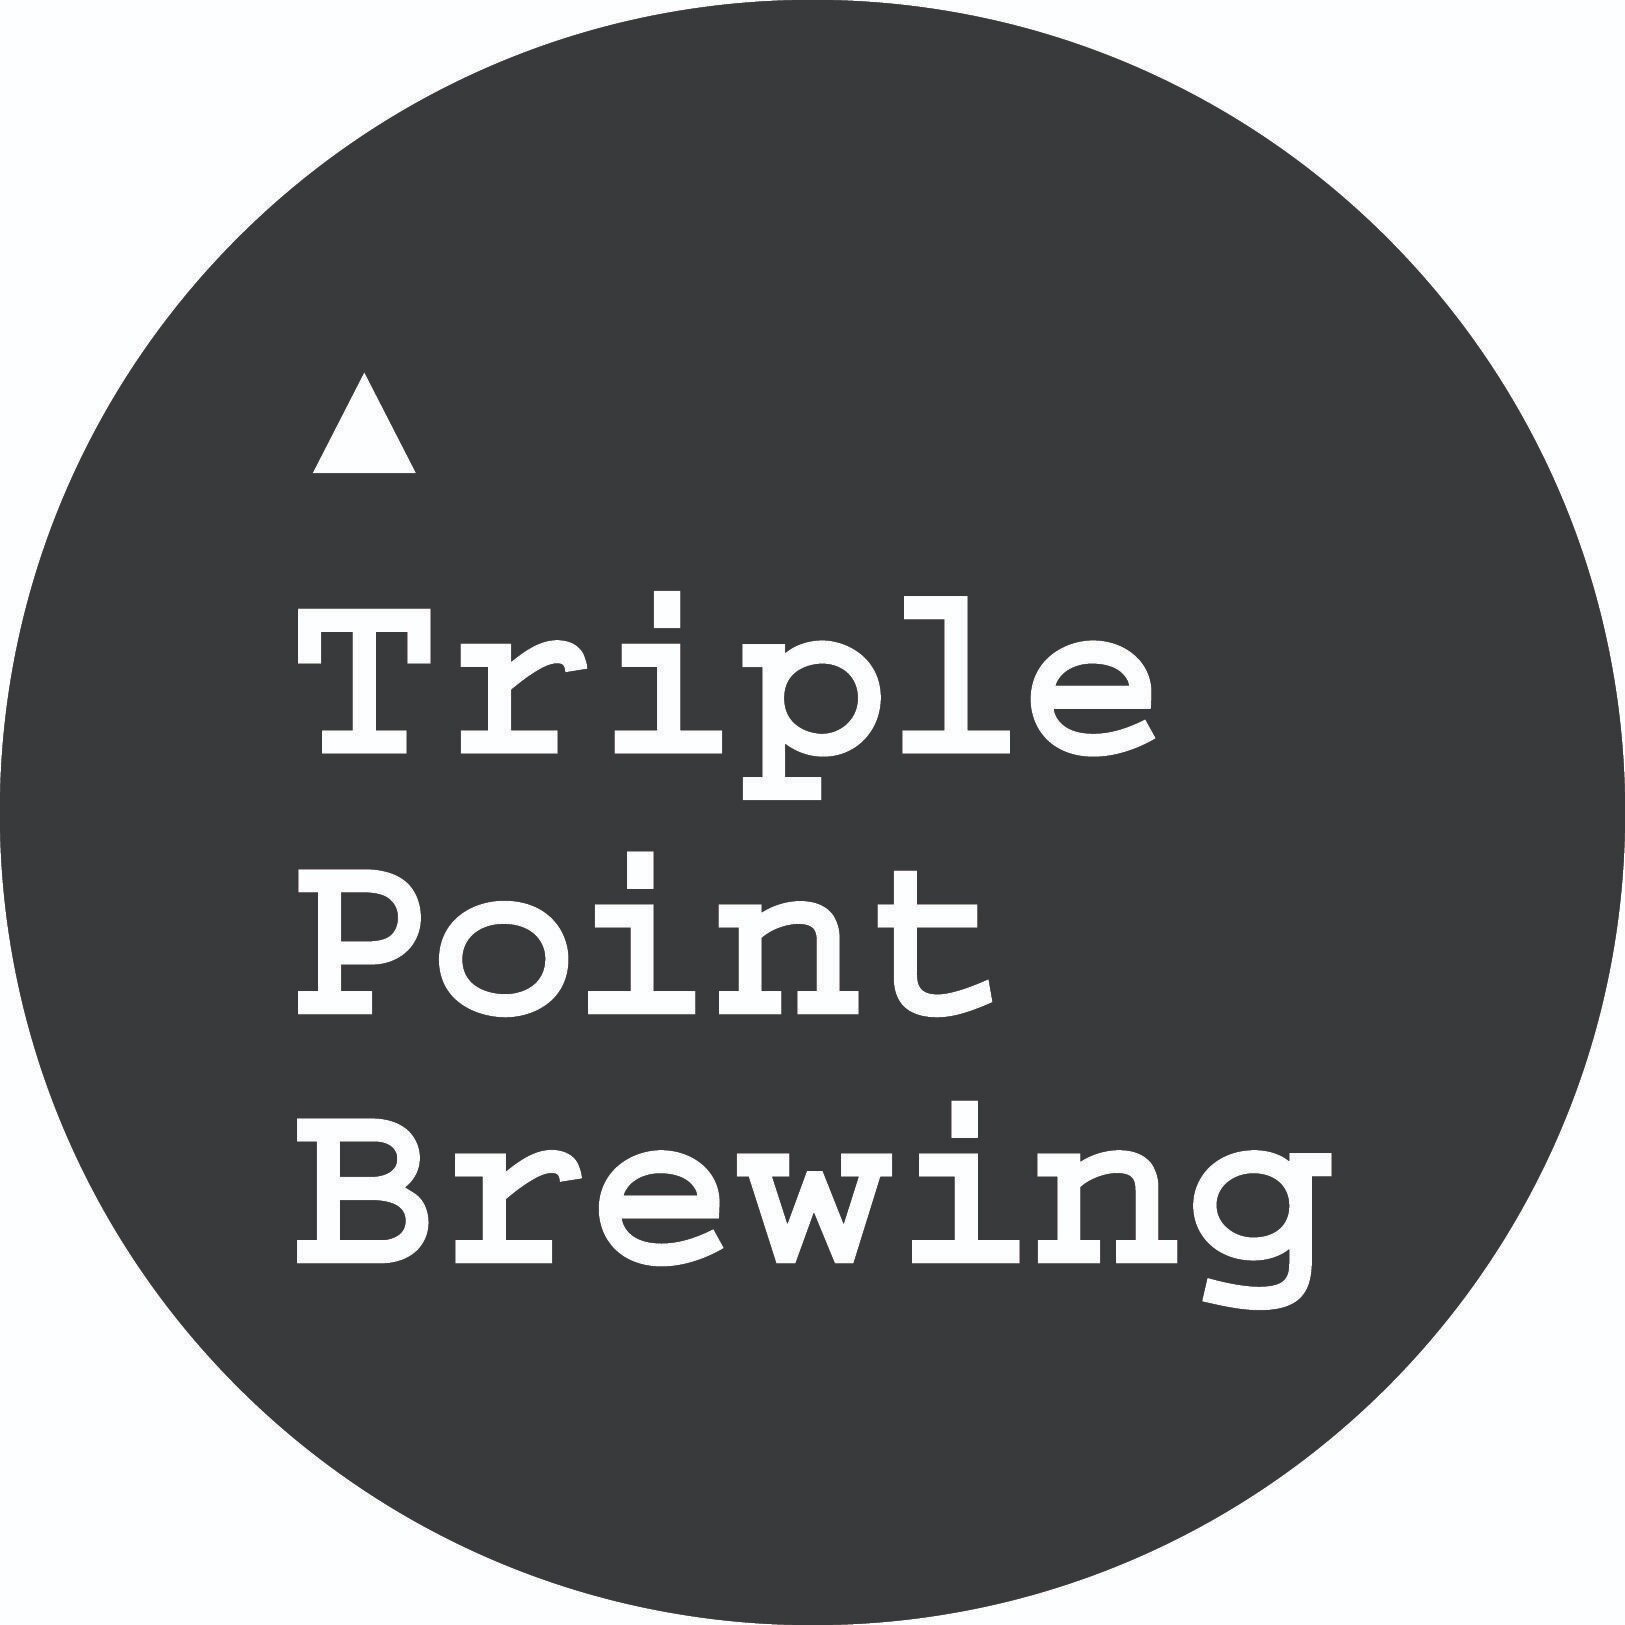 Point triple Difference Between